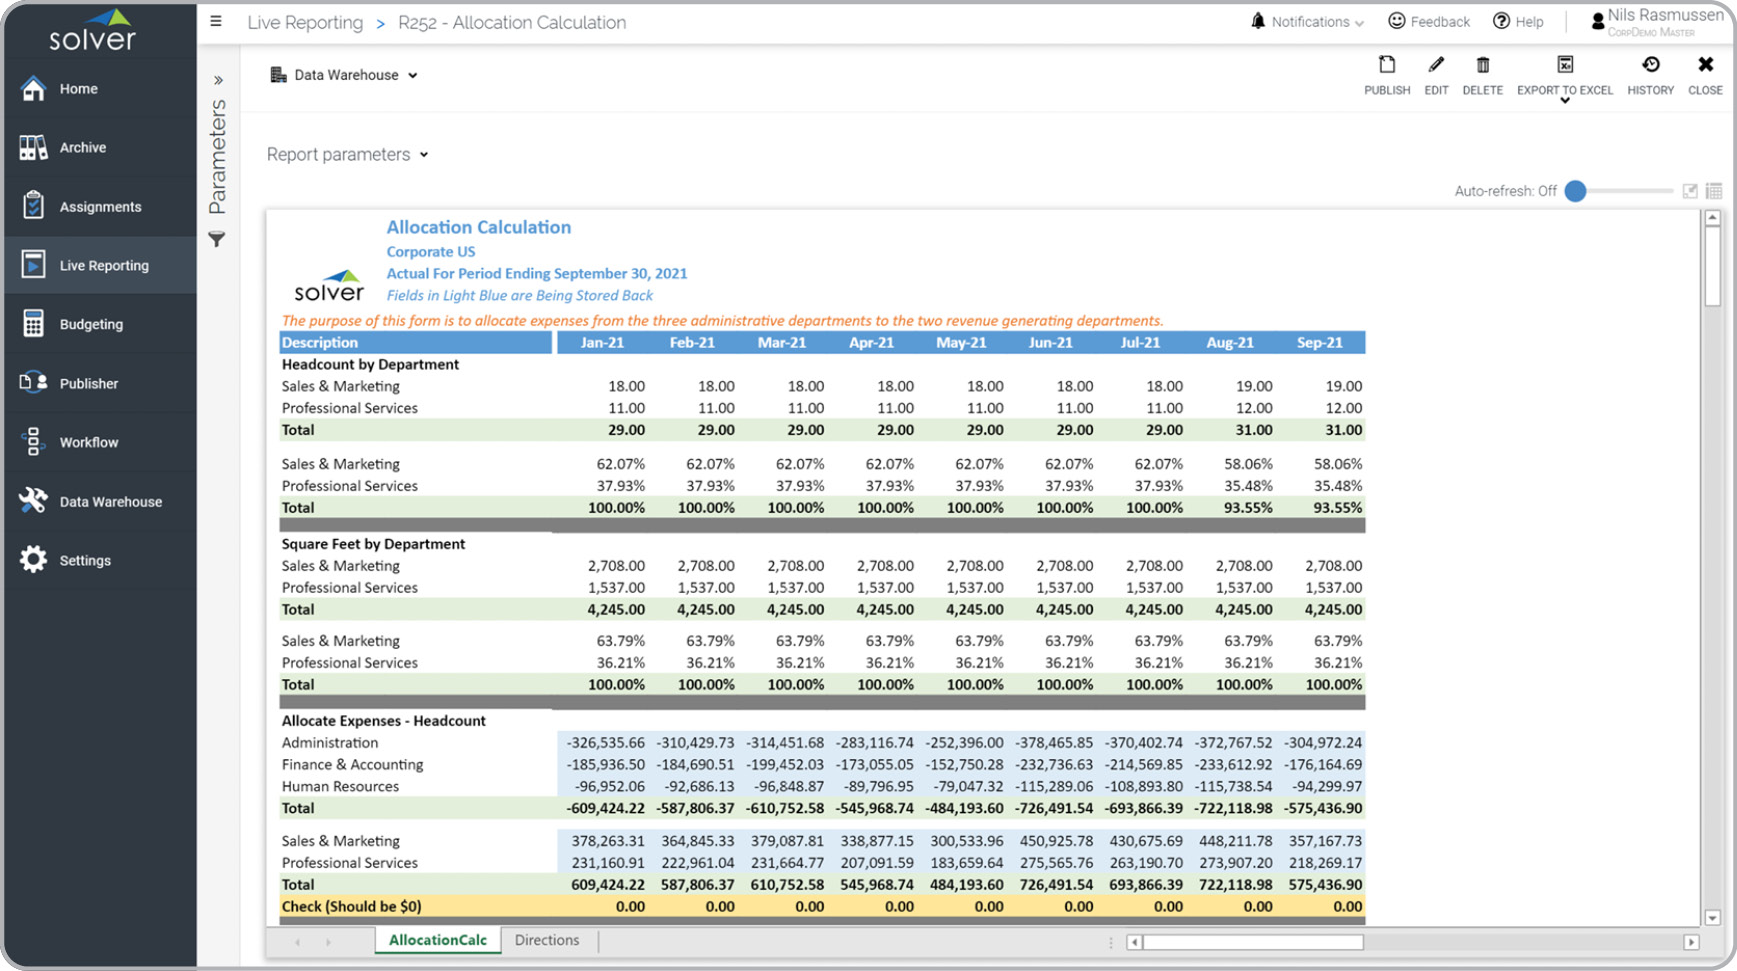 Automatically allocates admin expenses to departments based on drivers (i.e. headcount).